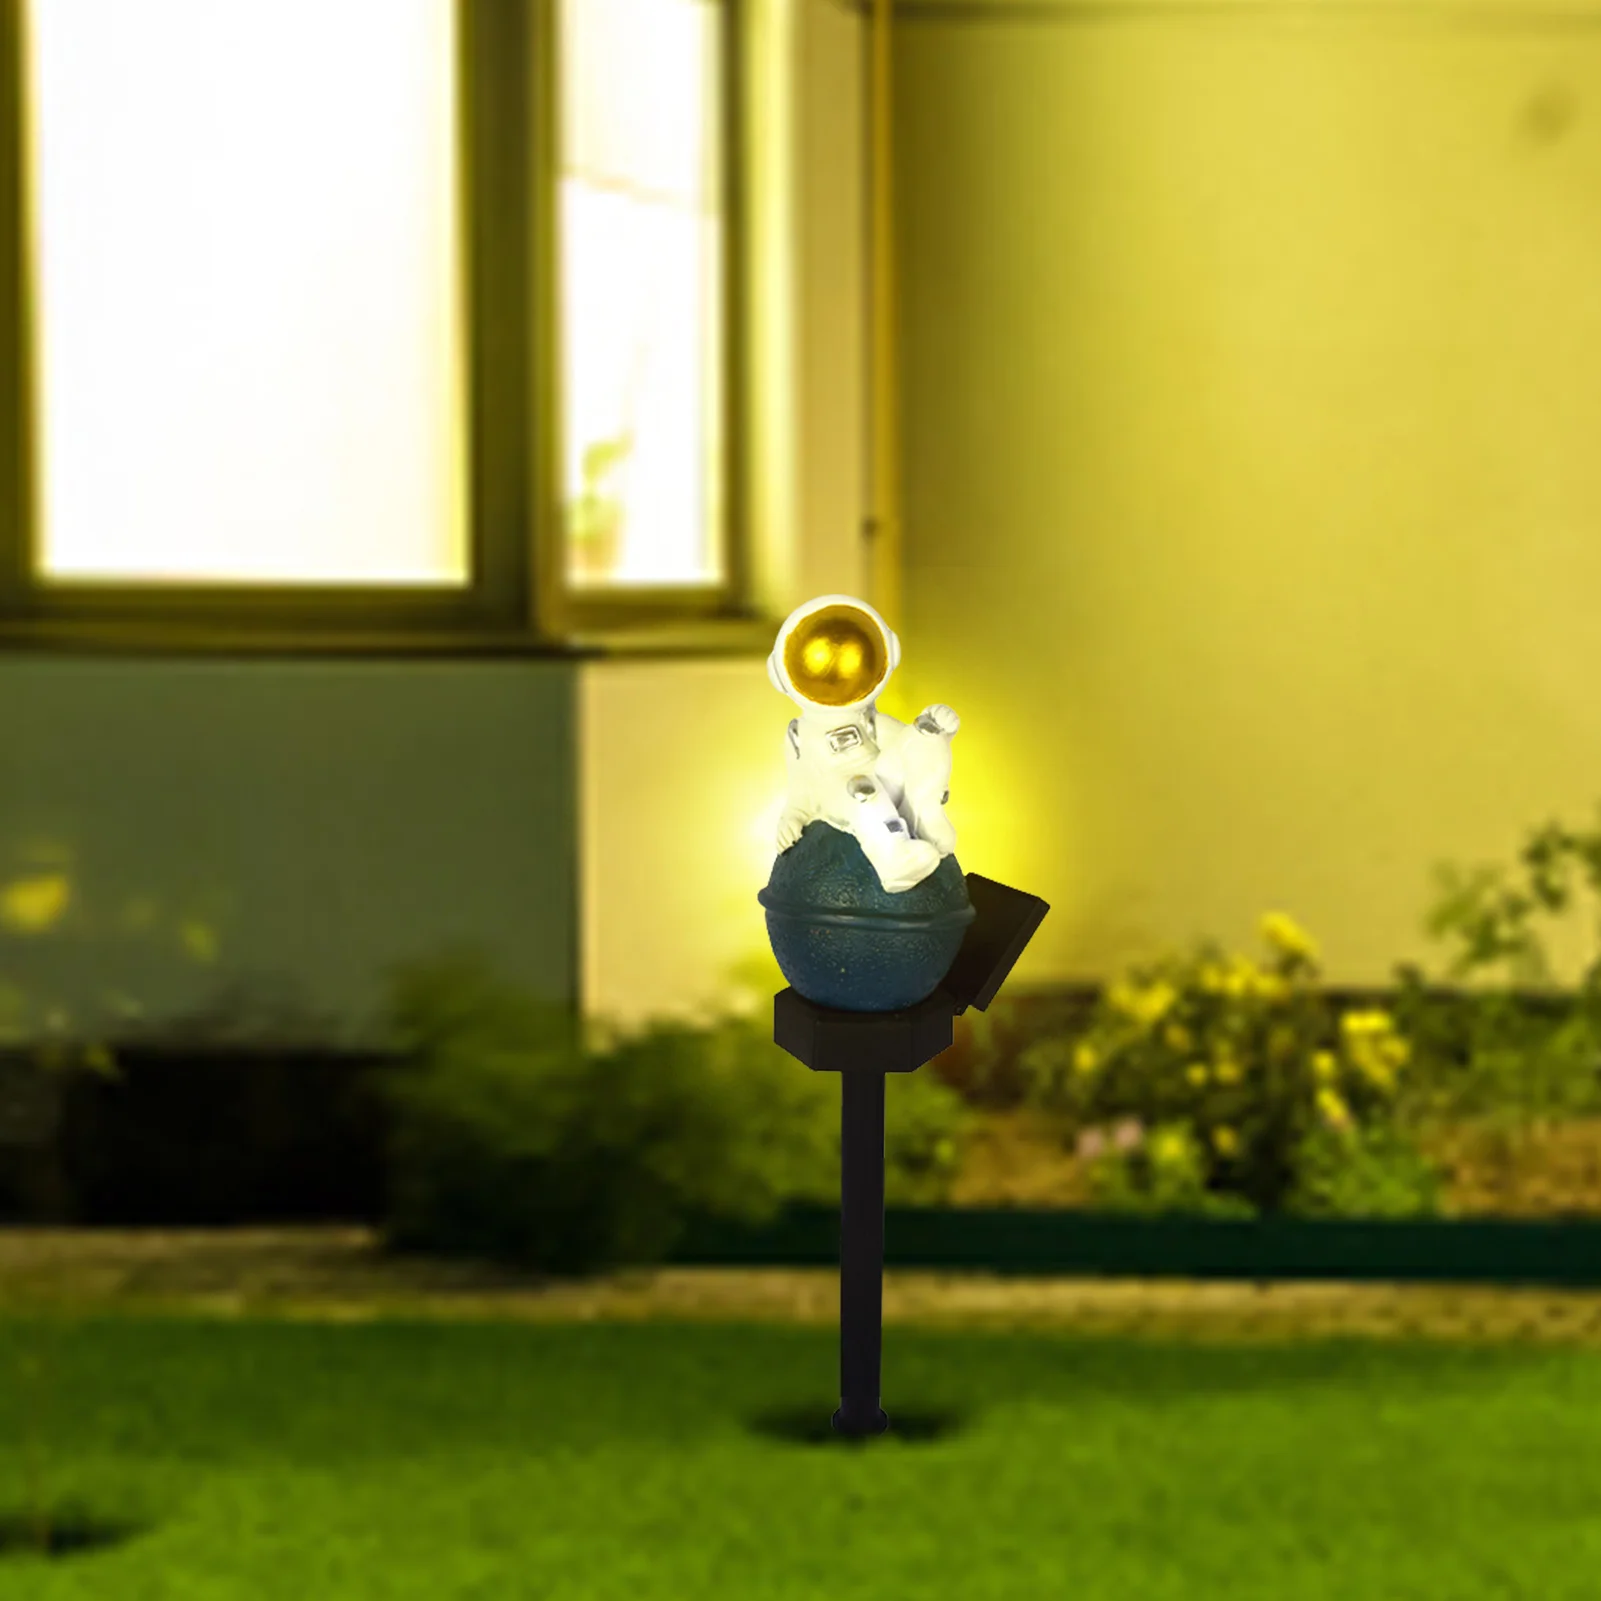 

Lawn Lamp Solar Astronaut Moon Figurine Stake Light Solar Powered Outdoor Lamp For Garden Lawn Landscape Lamp Holiday Light